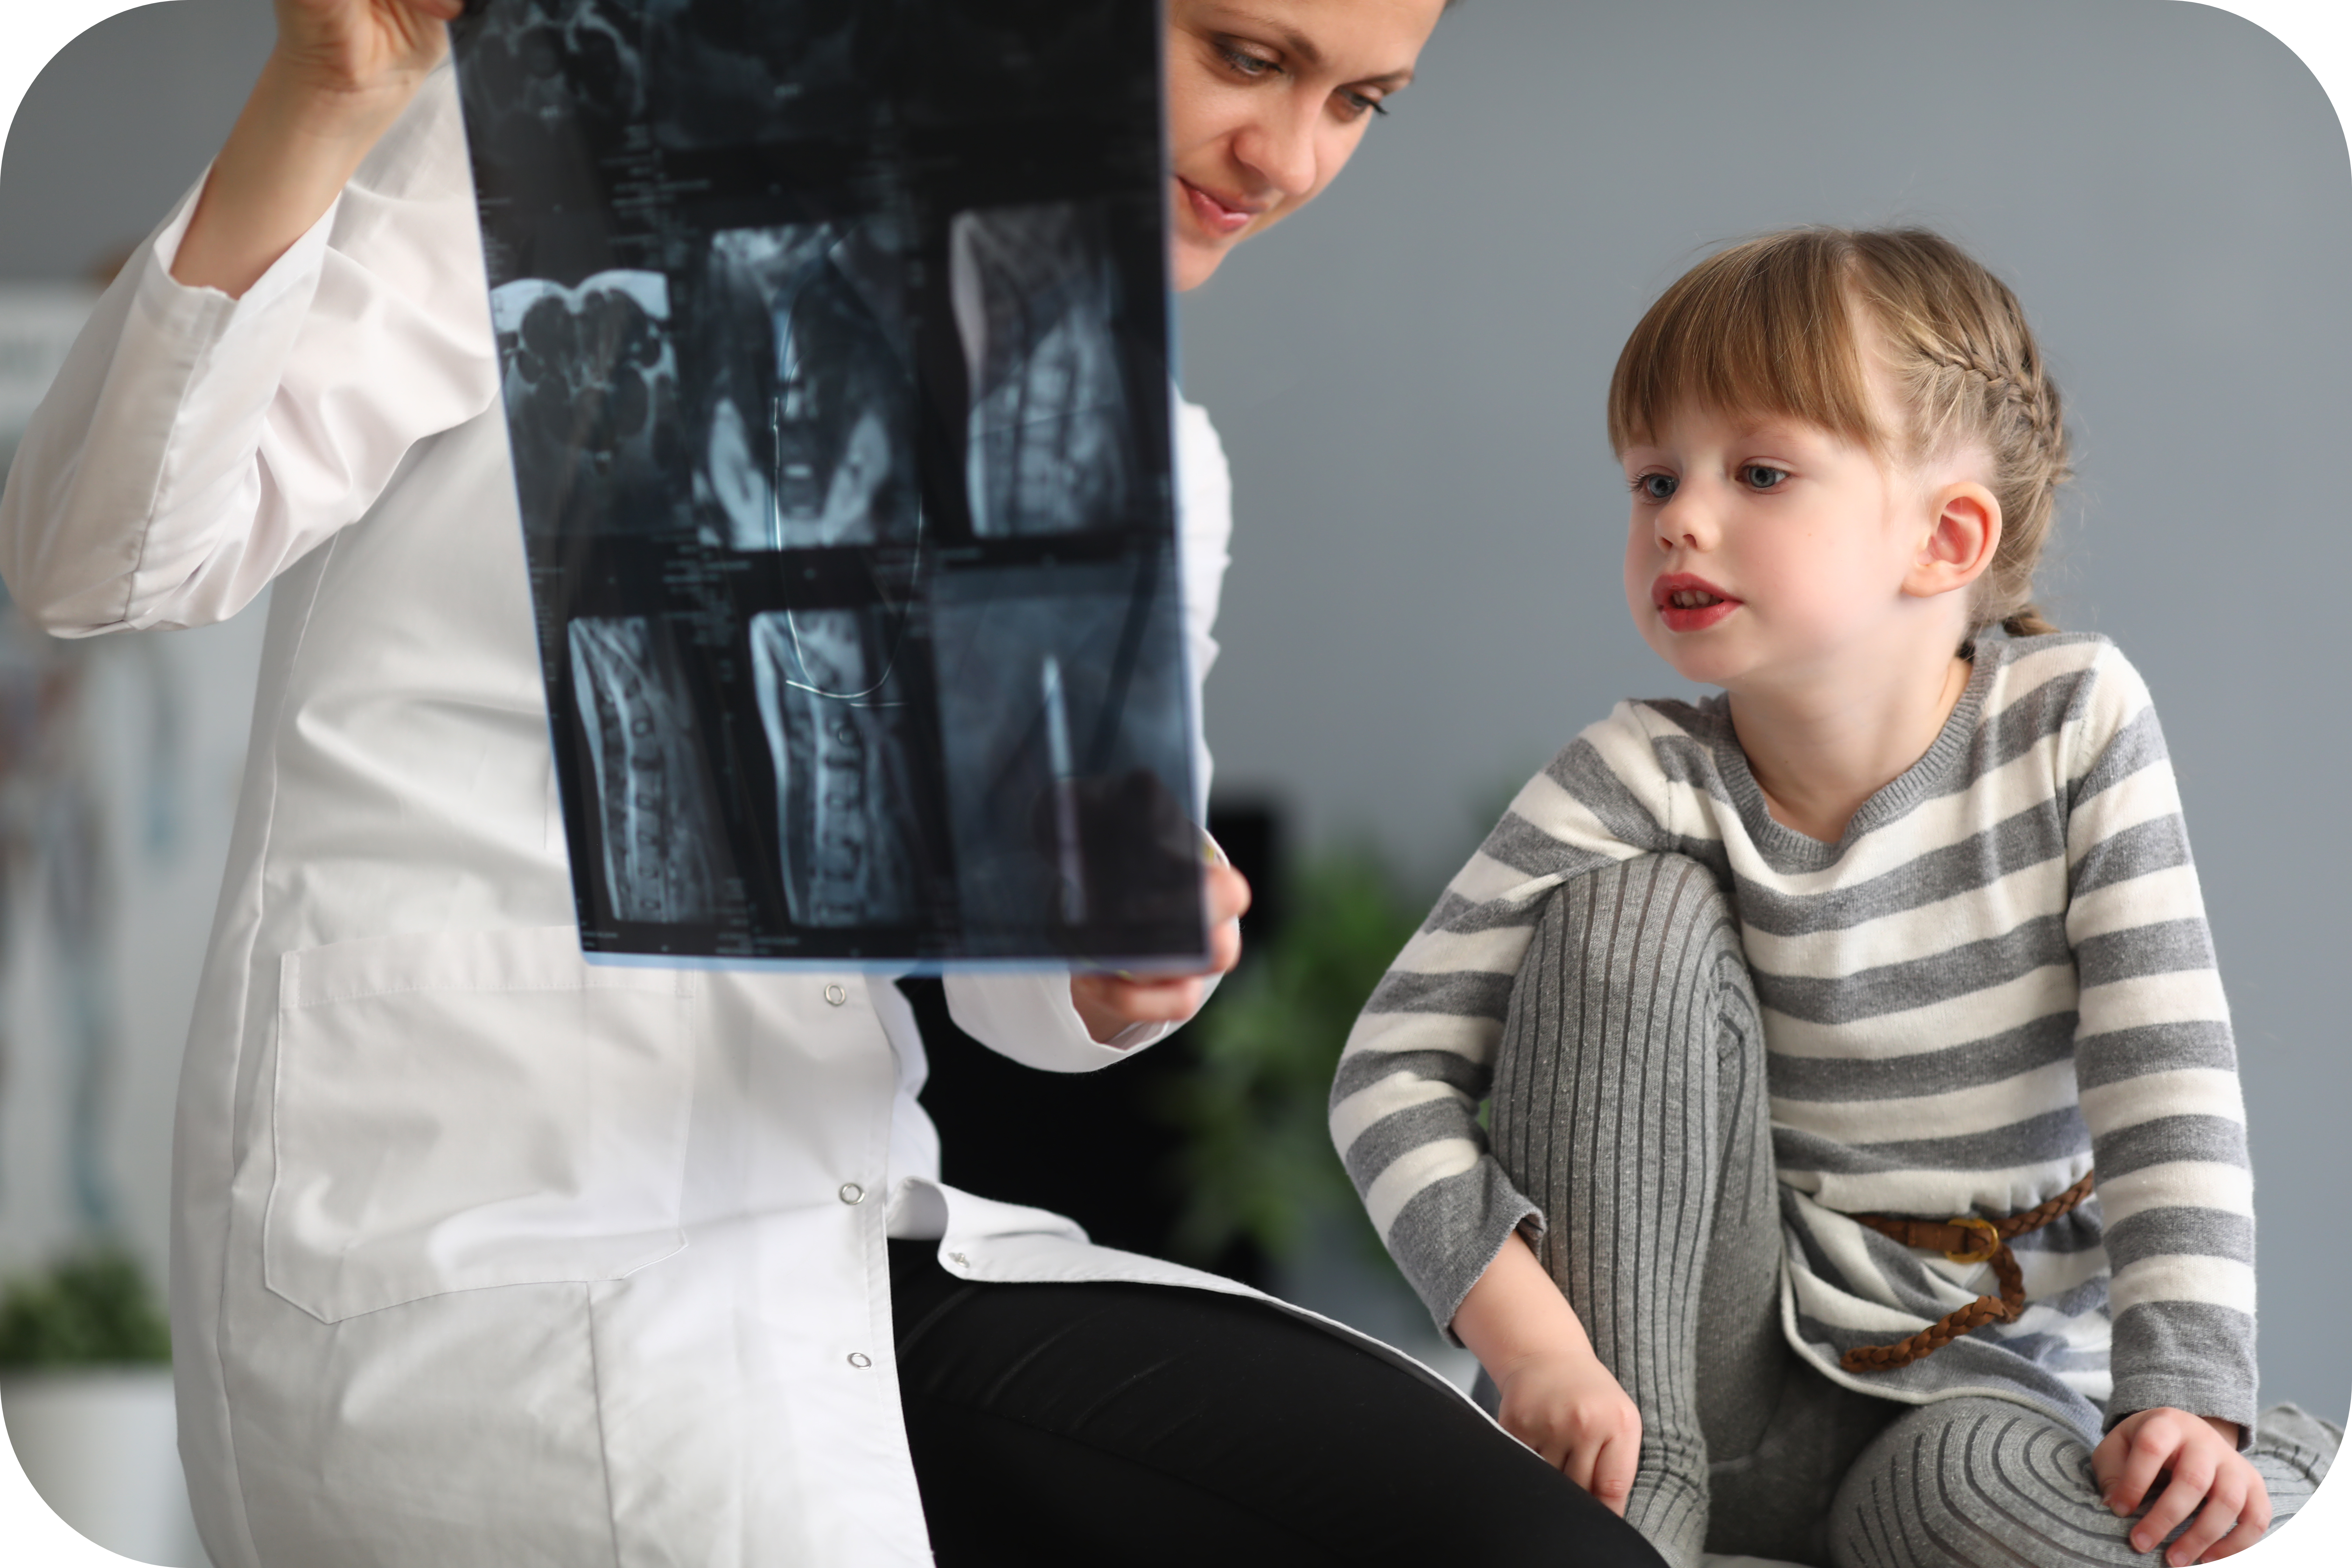 Trust LuskinOIC Experts to Diagnose, Treat and Manage Your Child’s Scoliosis